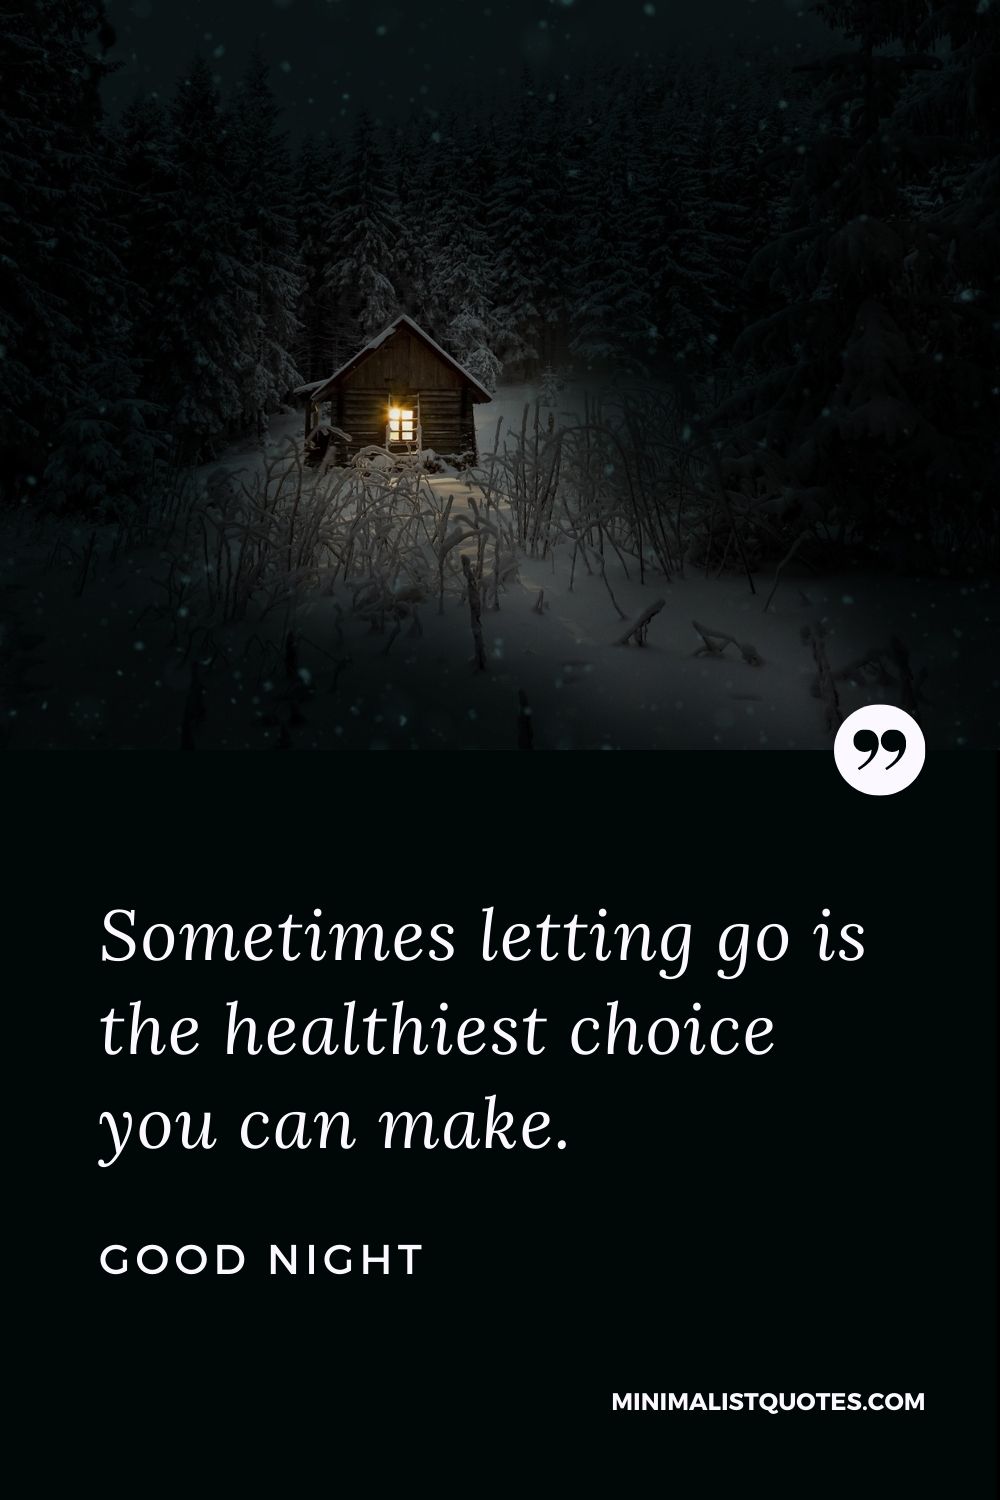 Good Night Wishes - Sometimes letting go is the healthiest choice you can make.